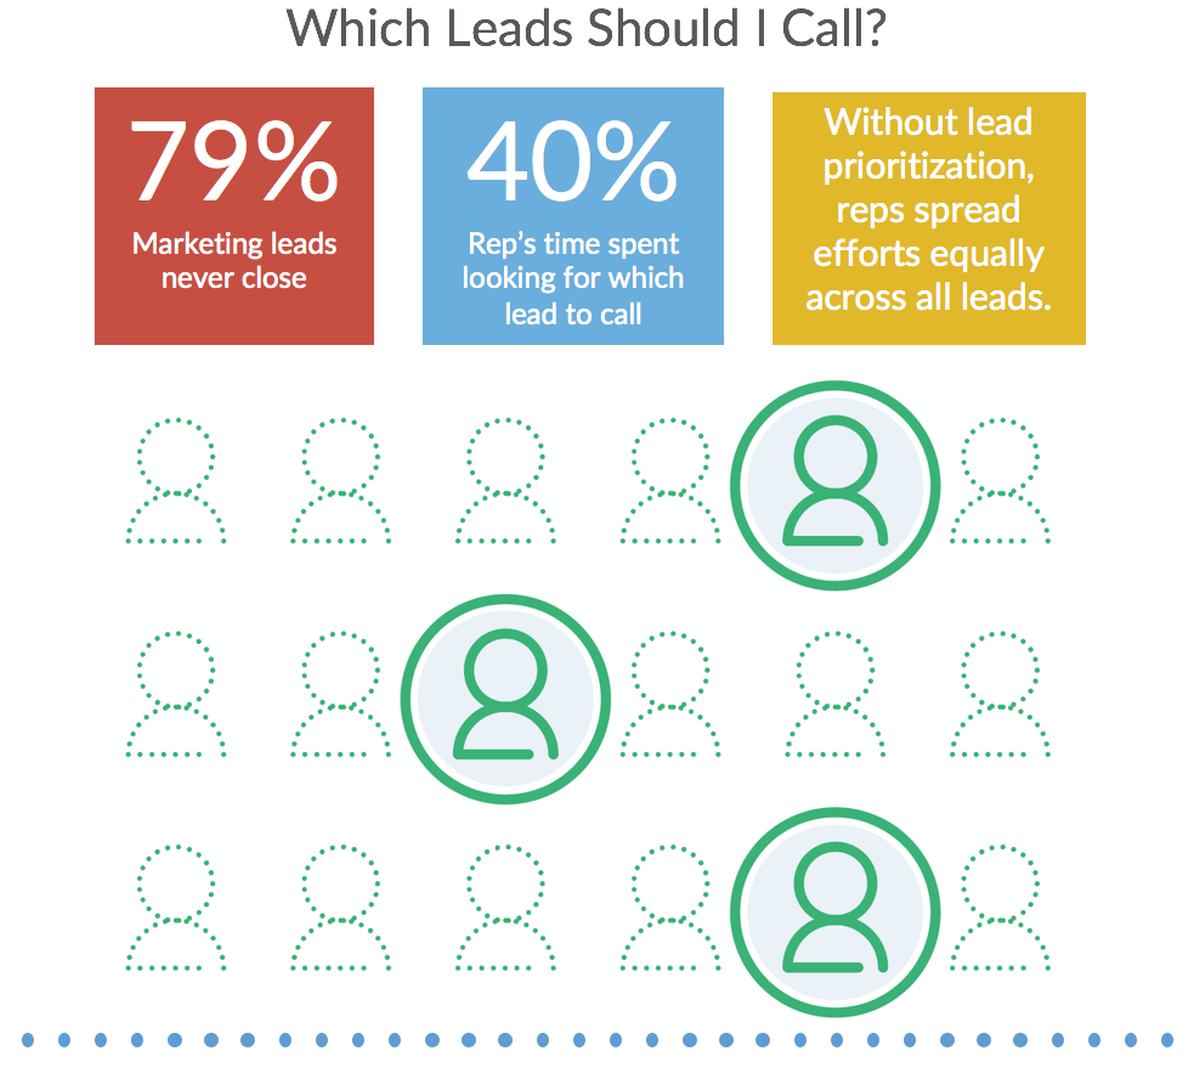 Lead Follow-Up | How to Prioritize Sales Leads